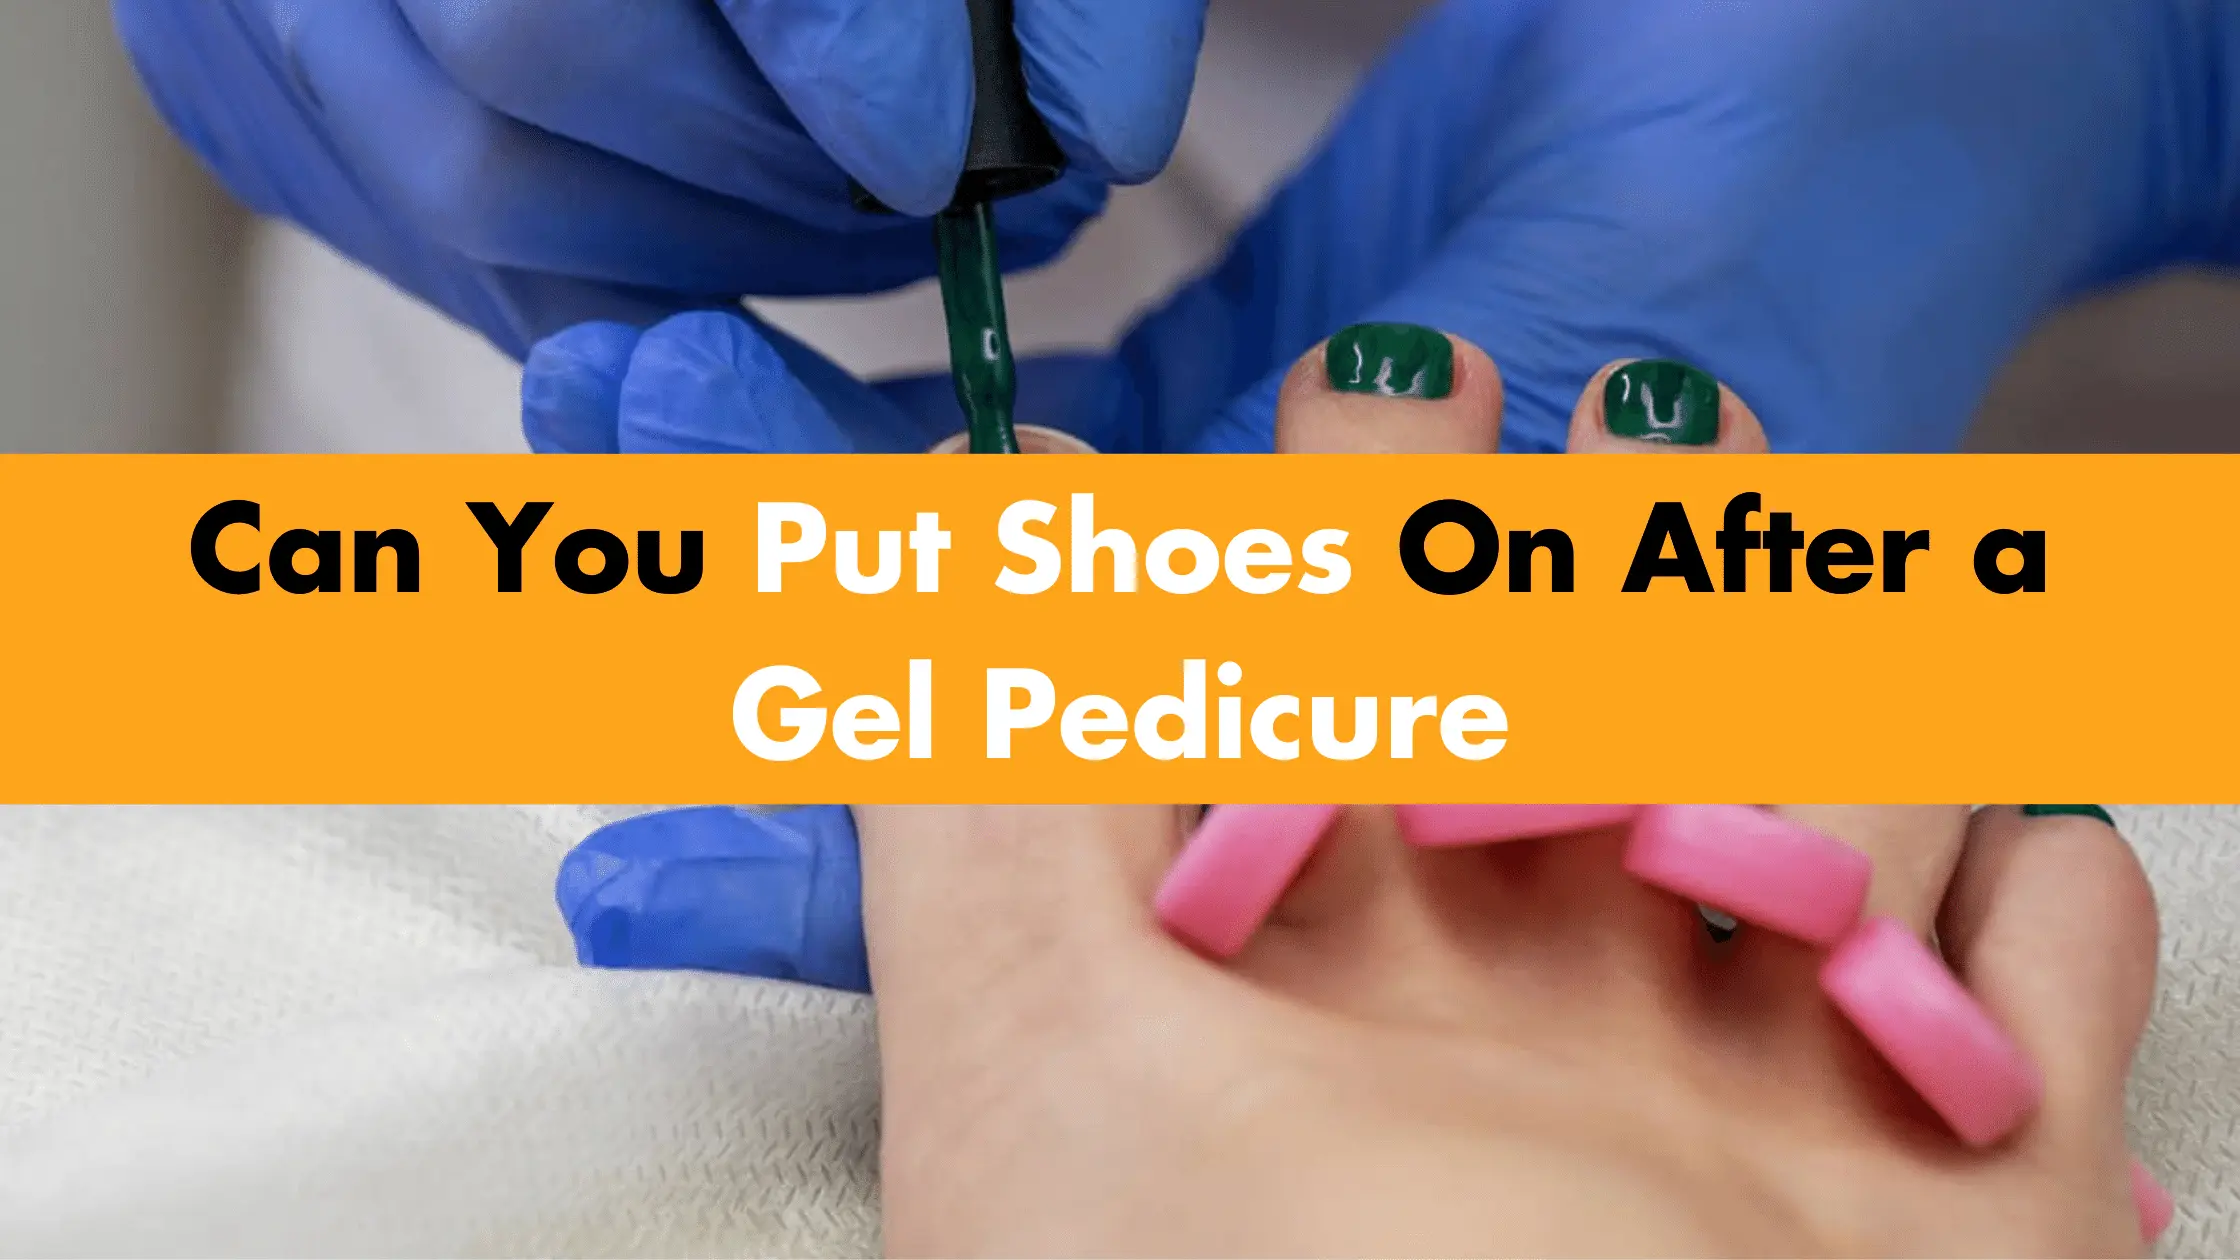 Can You Put Shoes On After a Gel Pedicure?